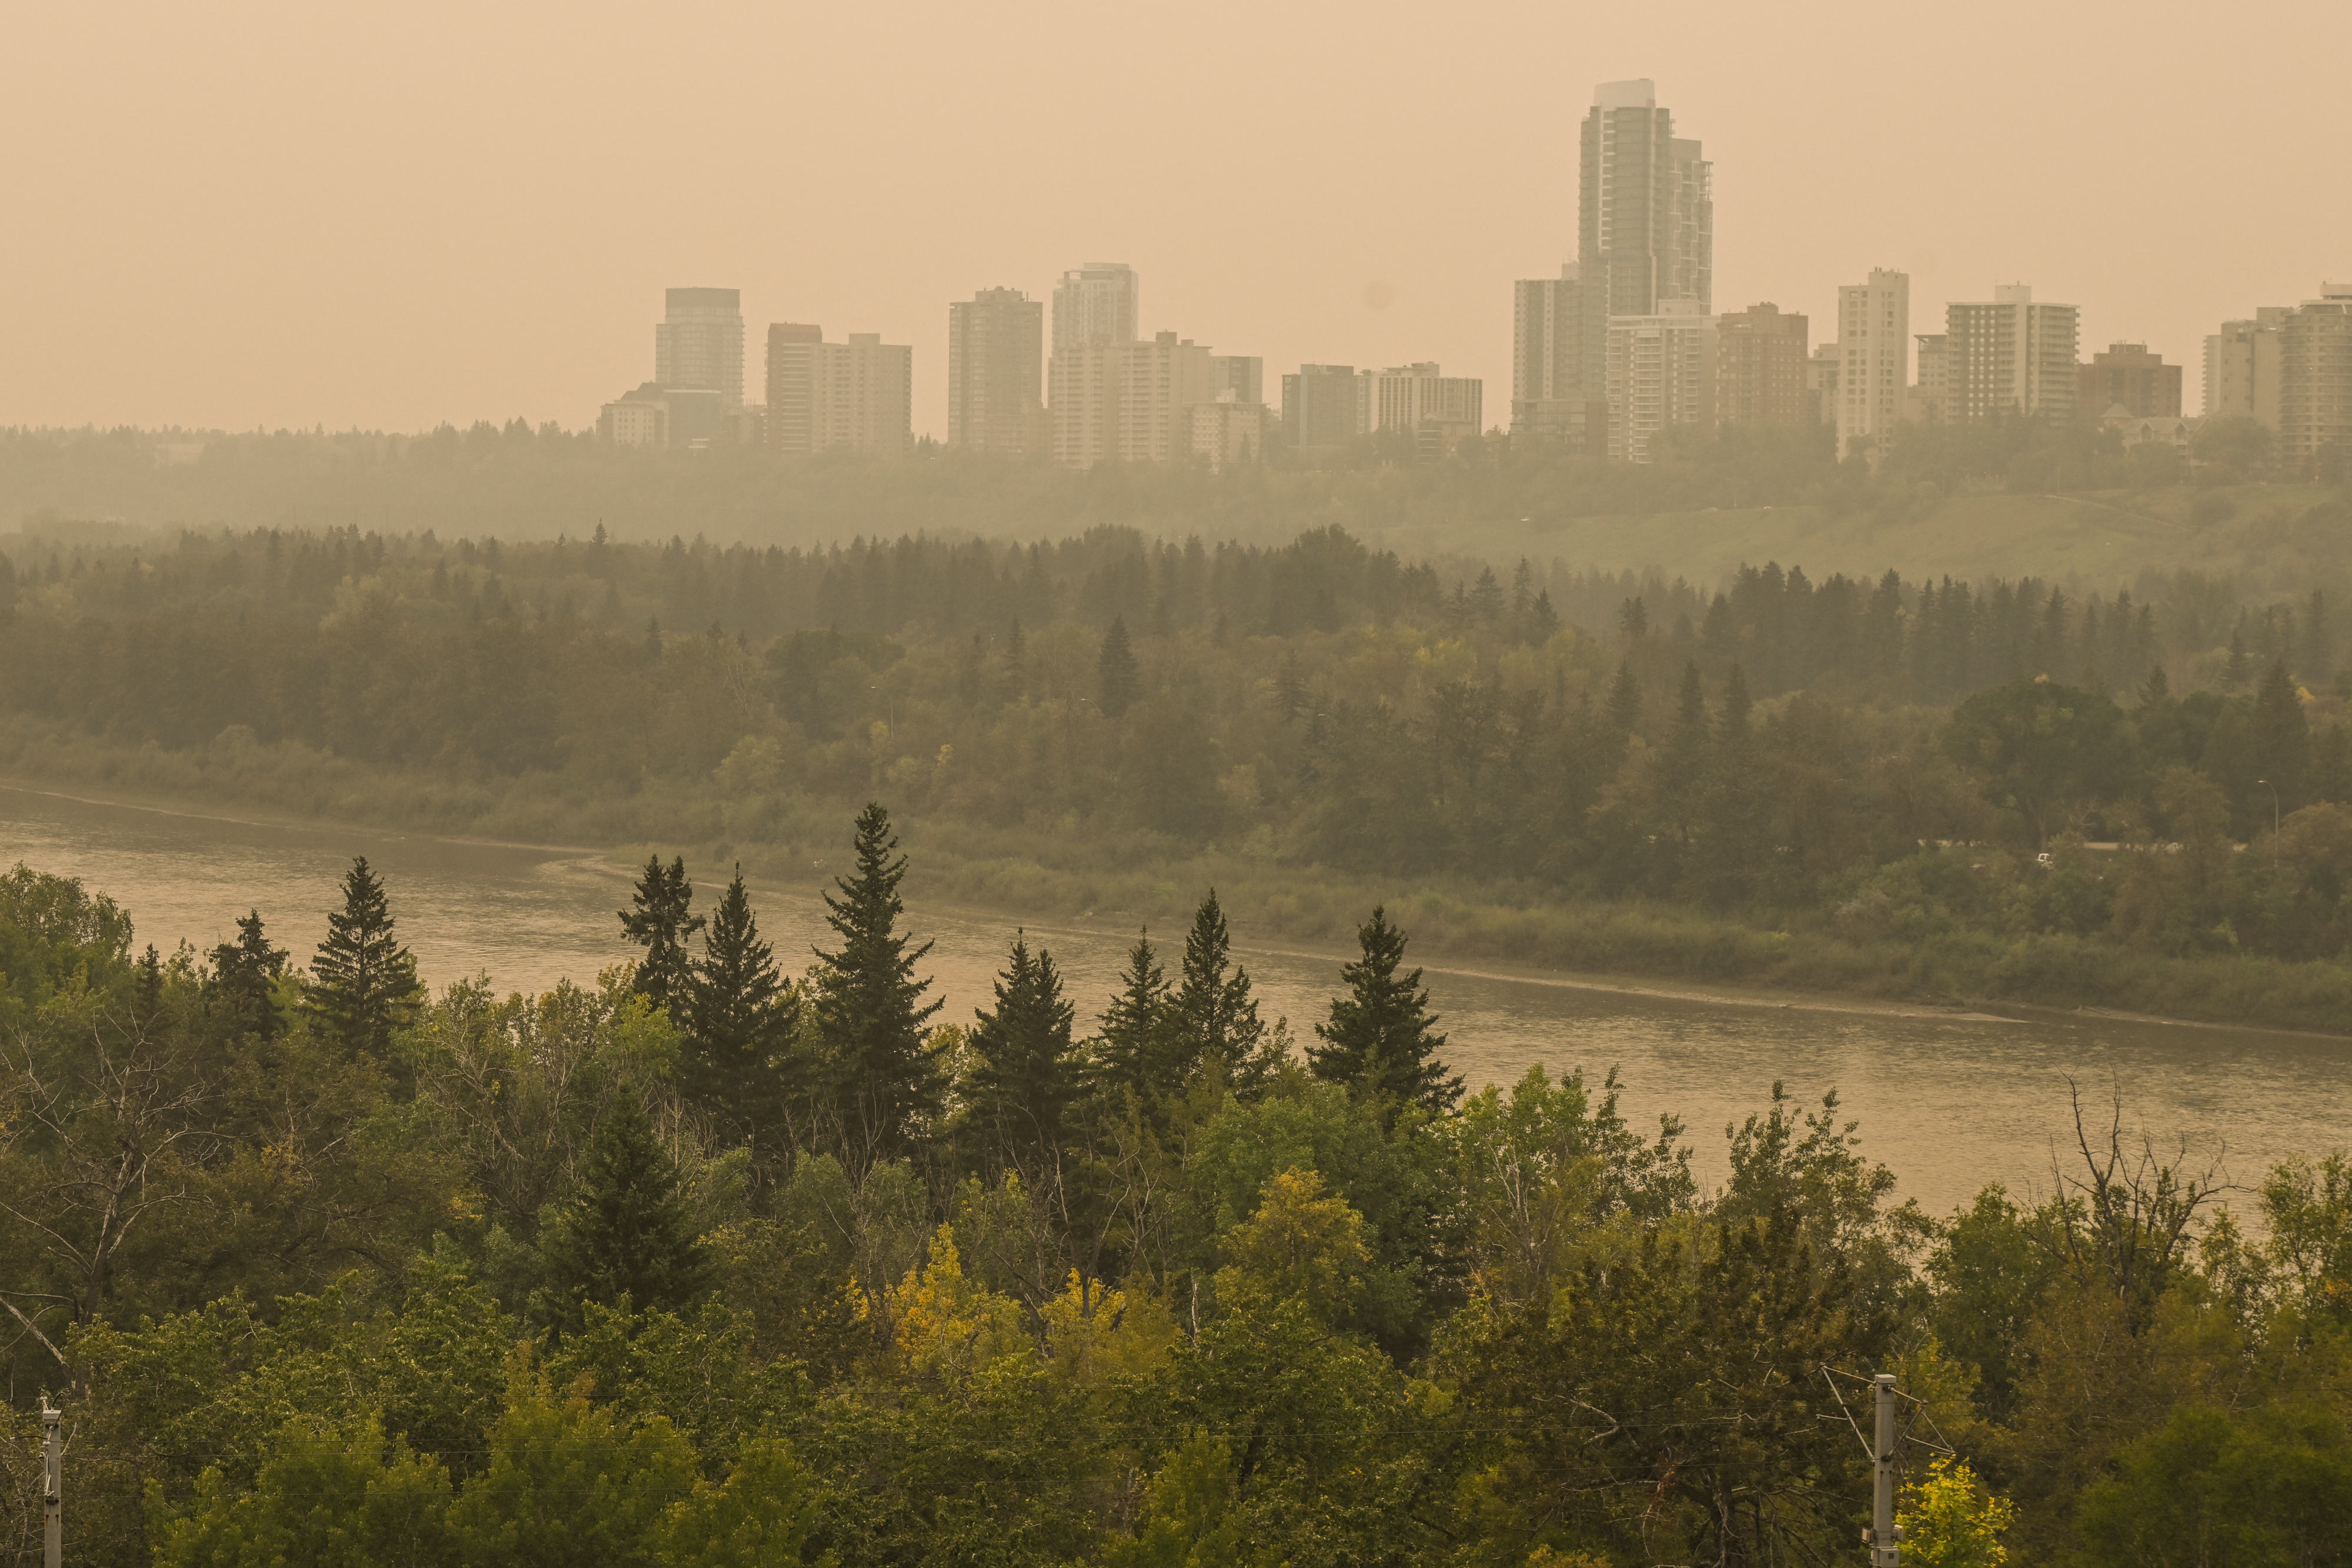 Saskatchewan forests and city skyline covered in haze.